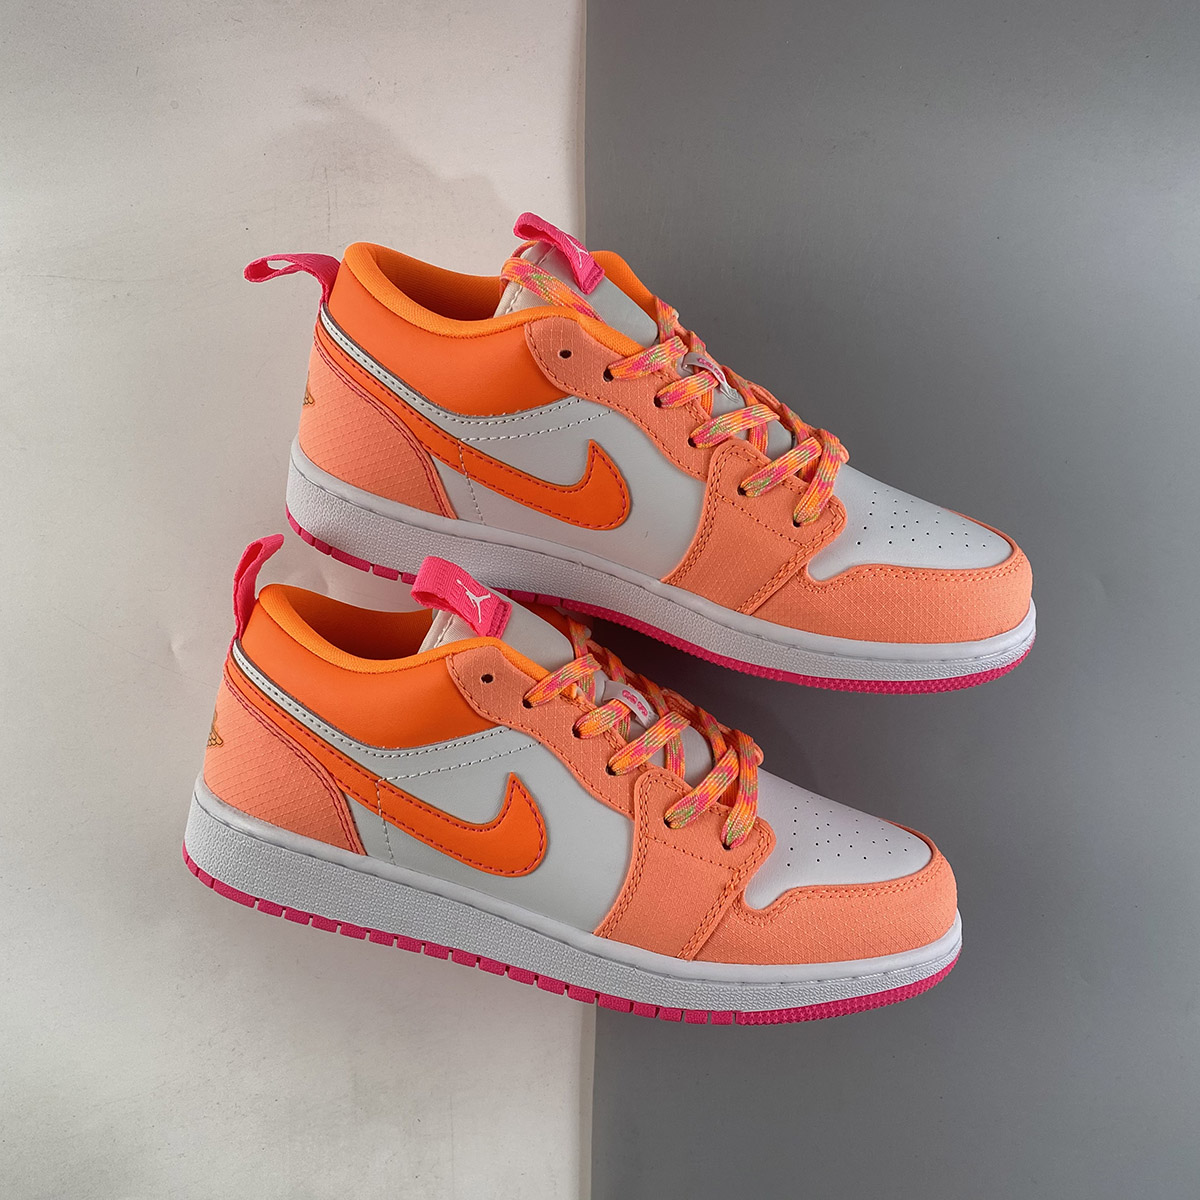 Air Jordan 1 Low Utility GS Pink White For Sale – The Sole Line